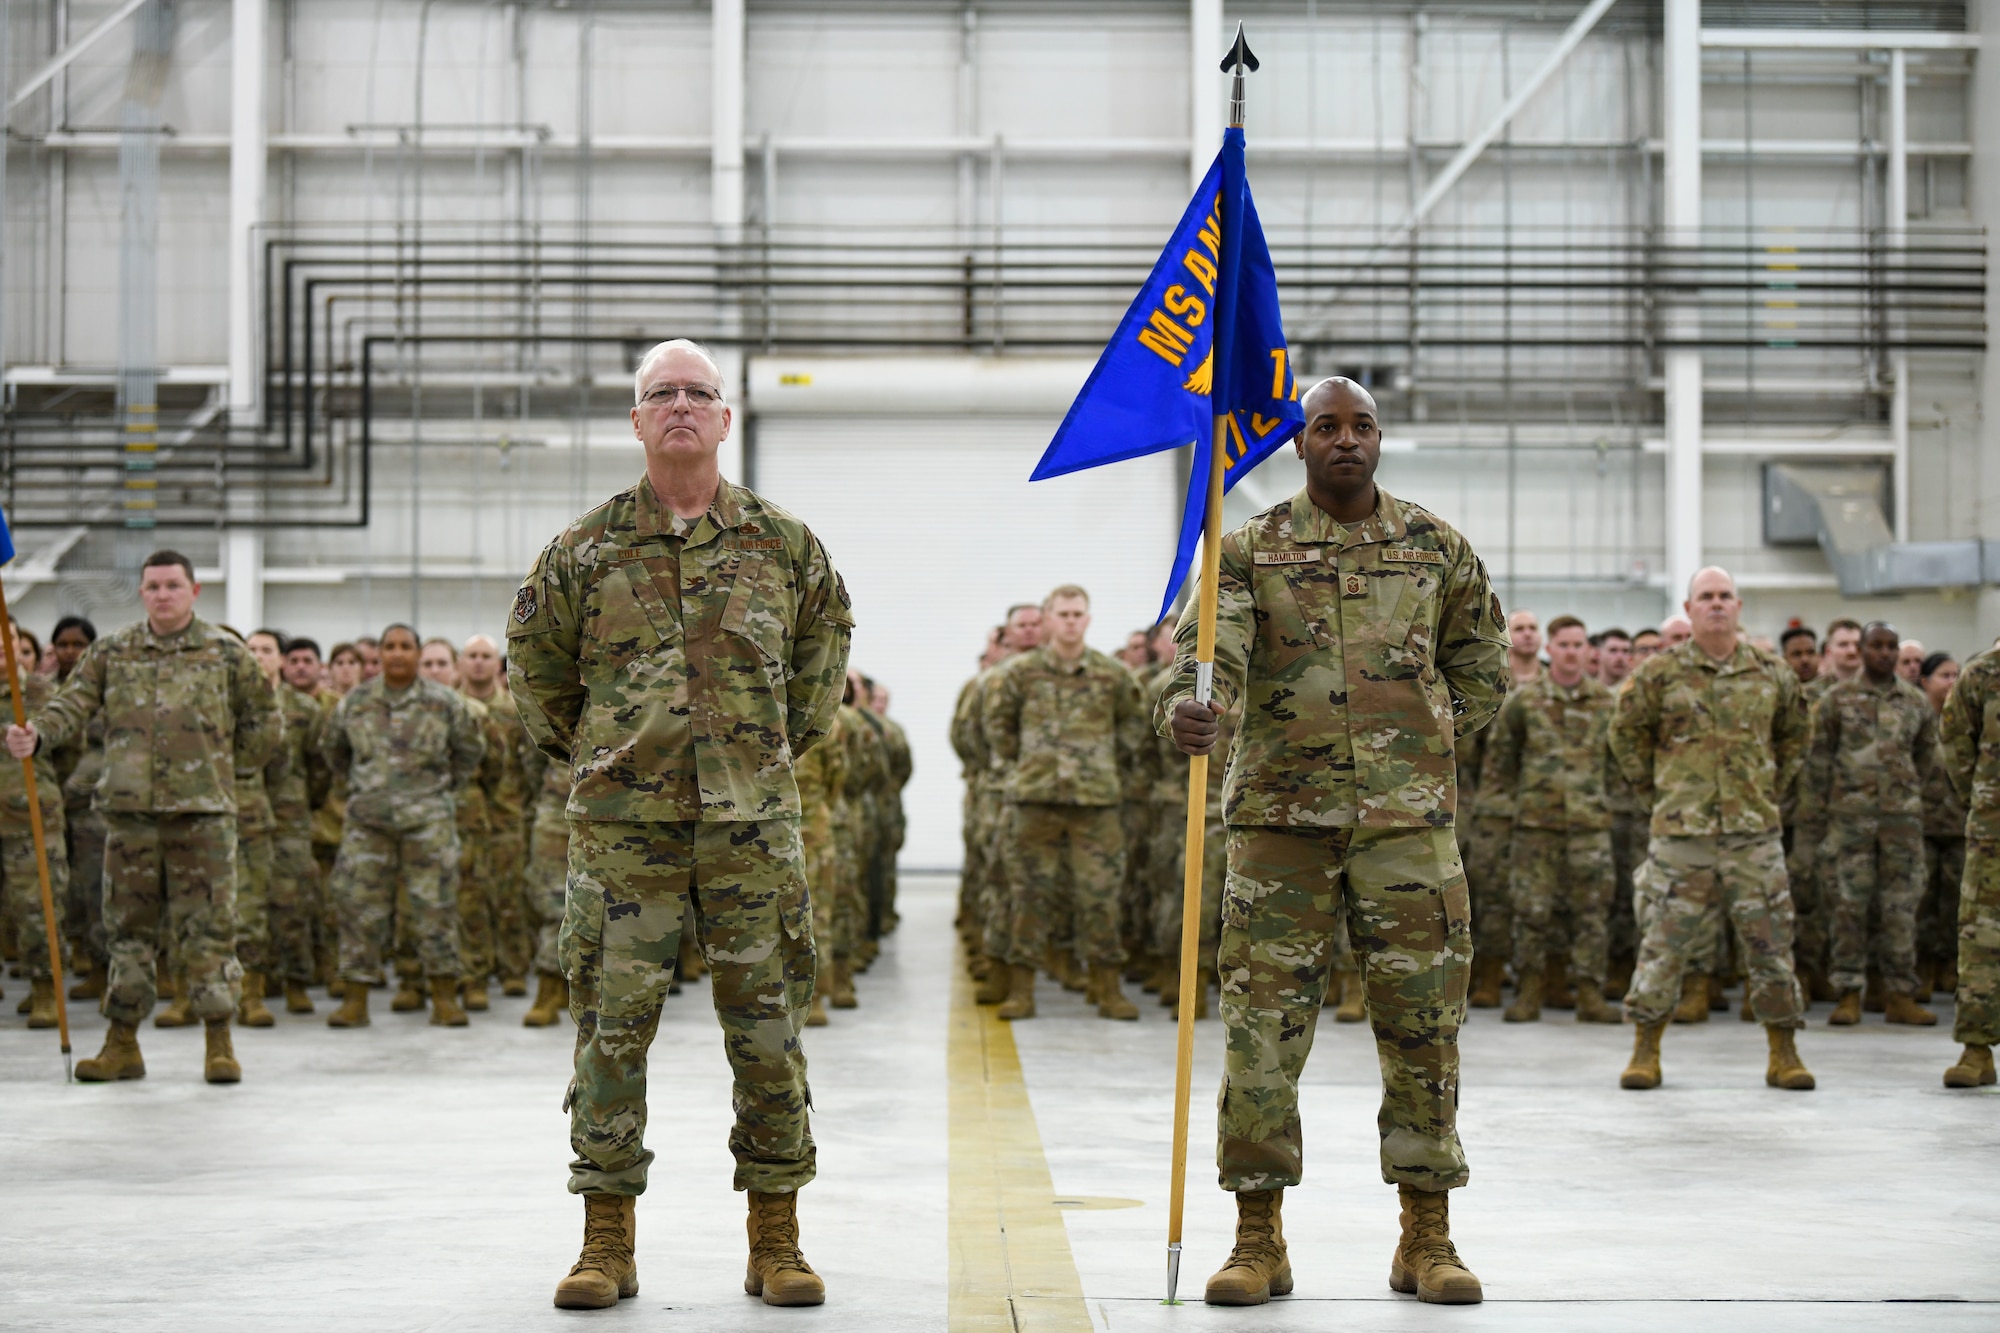 Col. Lynn Cole, vice commander of the 172nd Airlift Wing, and SMSgt. Ira Hamilton, wing first sergeant, direct the formation at the change of command ceremony welcoming Col. Britt A. Watson as the new commander at Thompson Field, Jackson, Mississippi, Feb. 6, 2022.